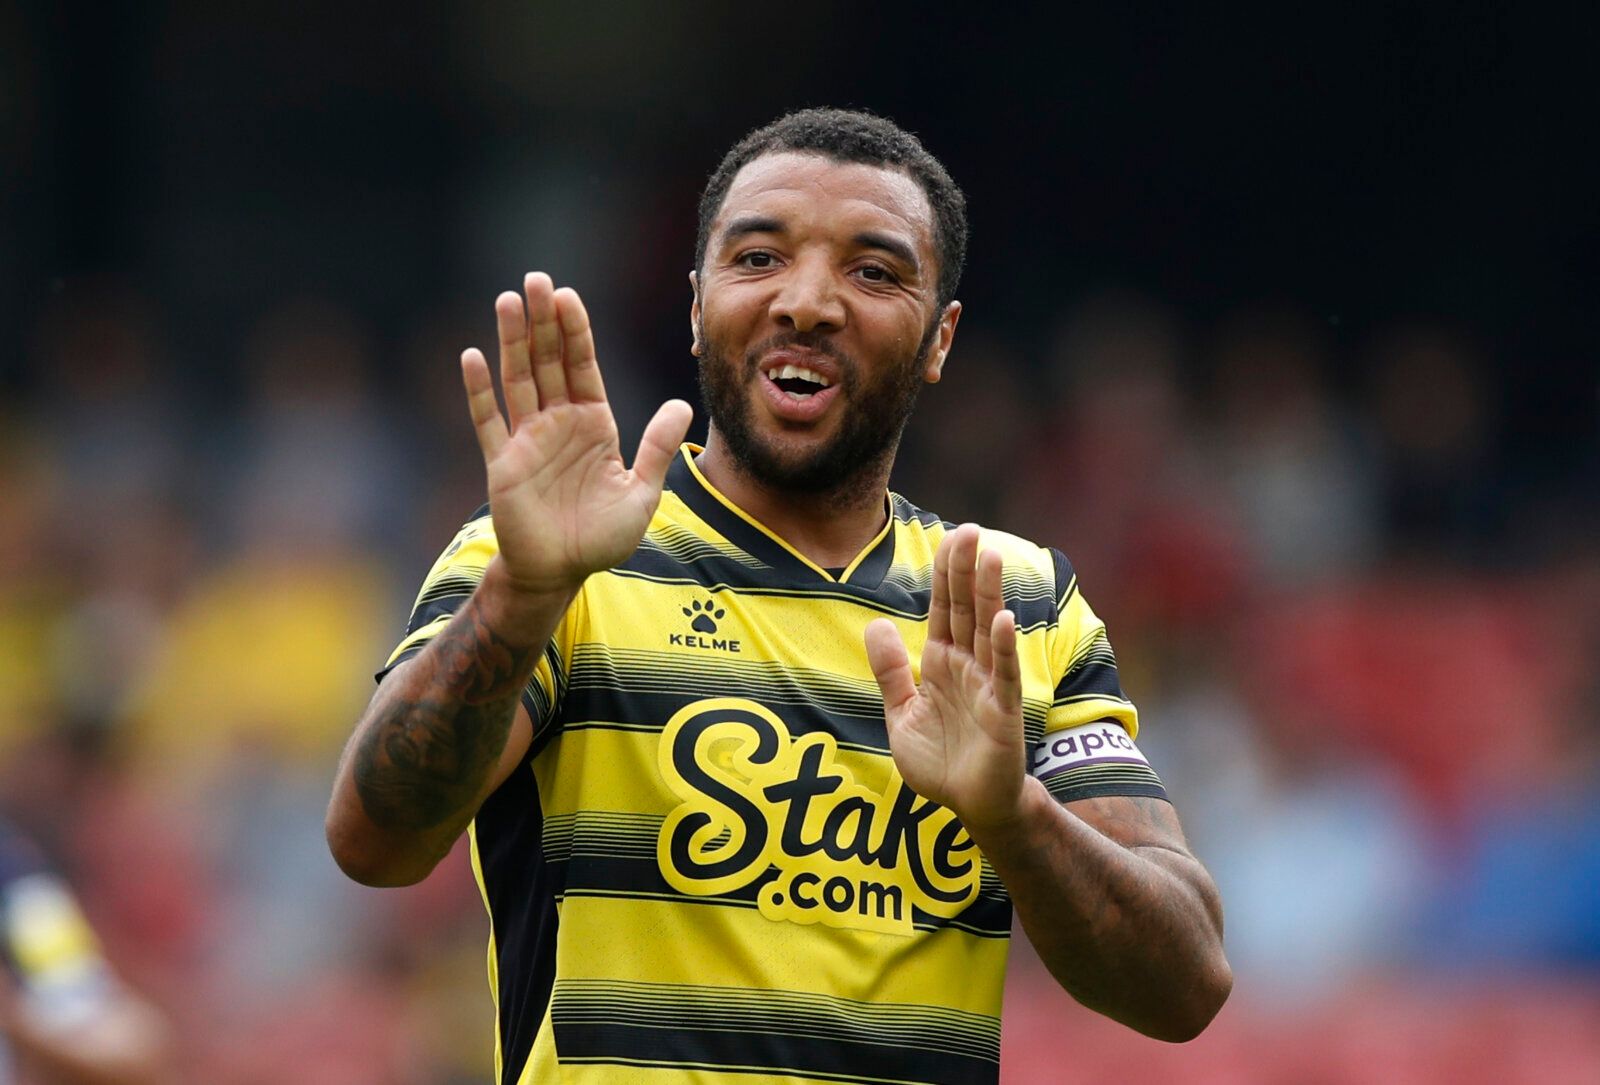 Soccer Football - Pre Season Friendly - Watford v West Bromwich Albion - Vicarage Road, Watford, Britain - July 24, 2021 Watford's Troy Deeney Action Images via Reuters/Paul Childs